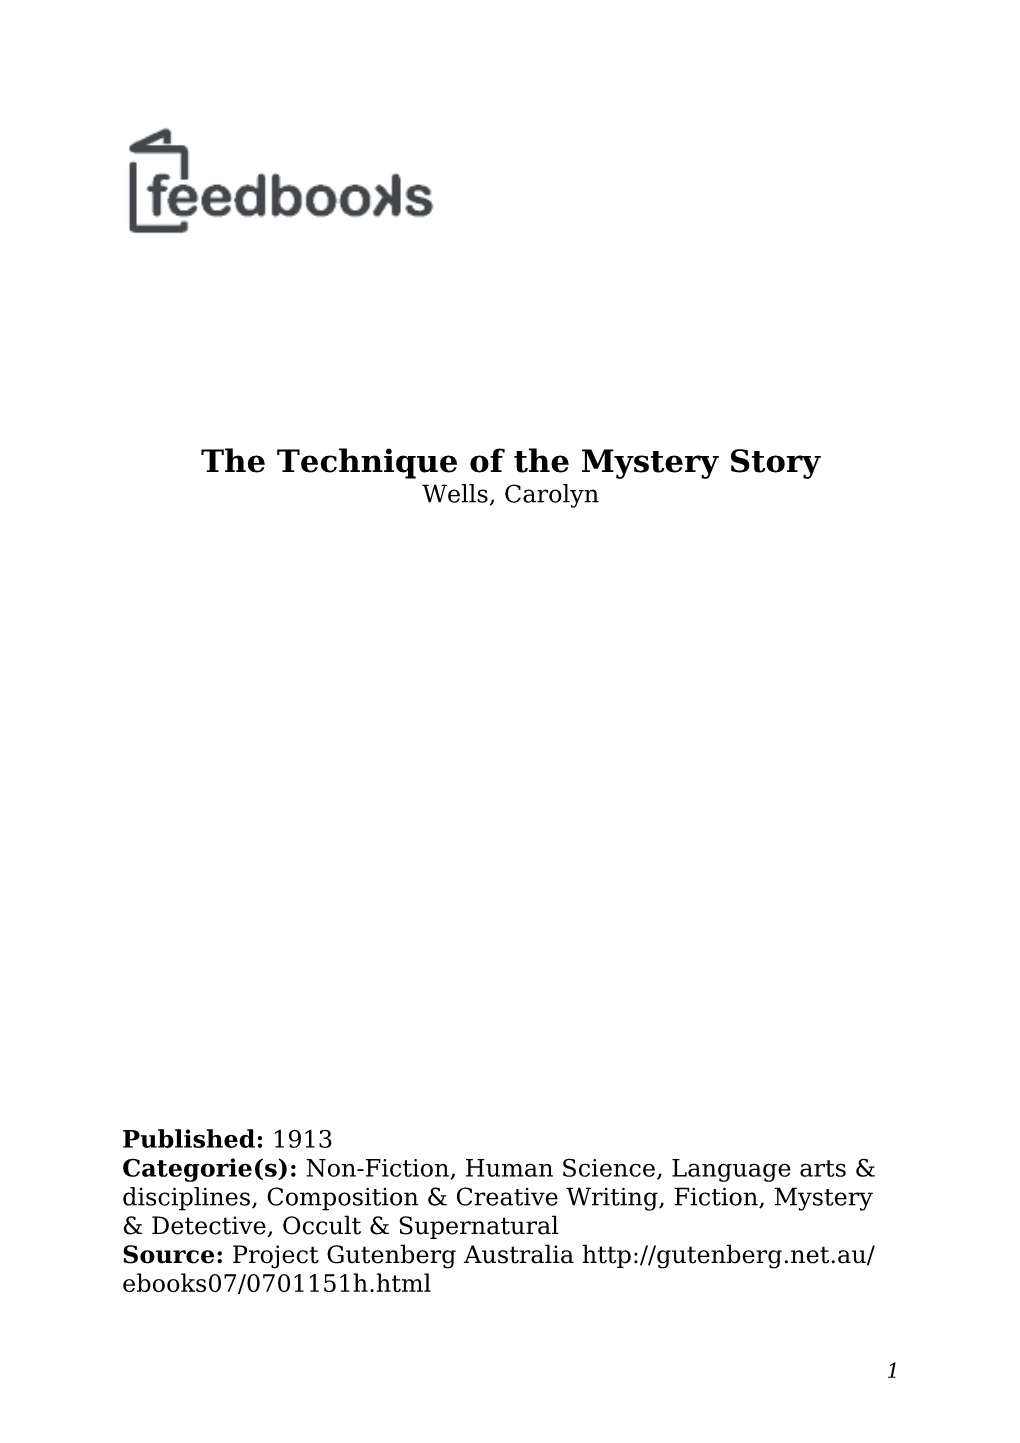 The Technique of the Mystery Story Wells, Carolyn